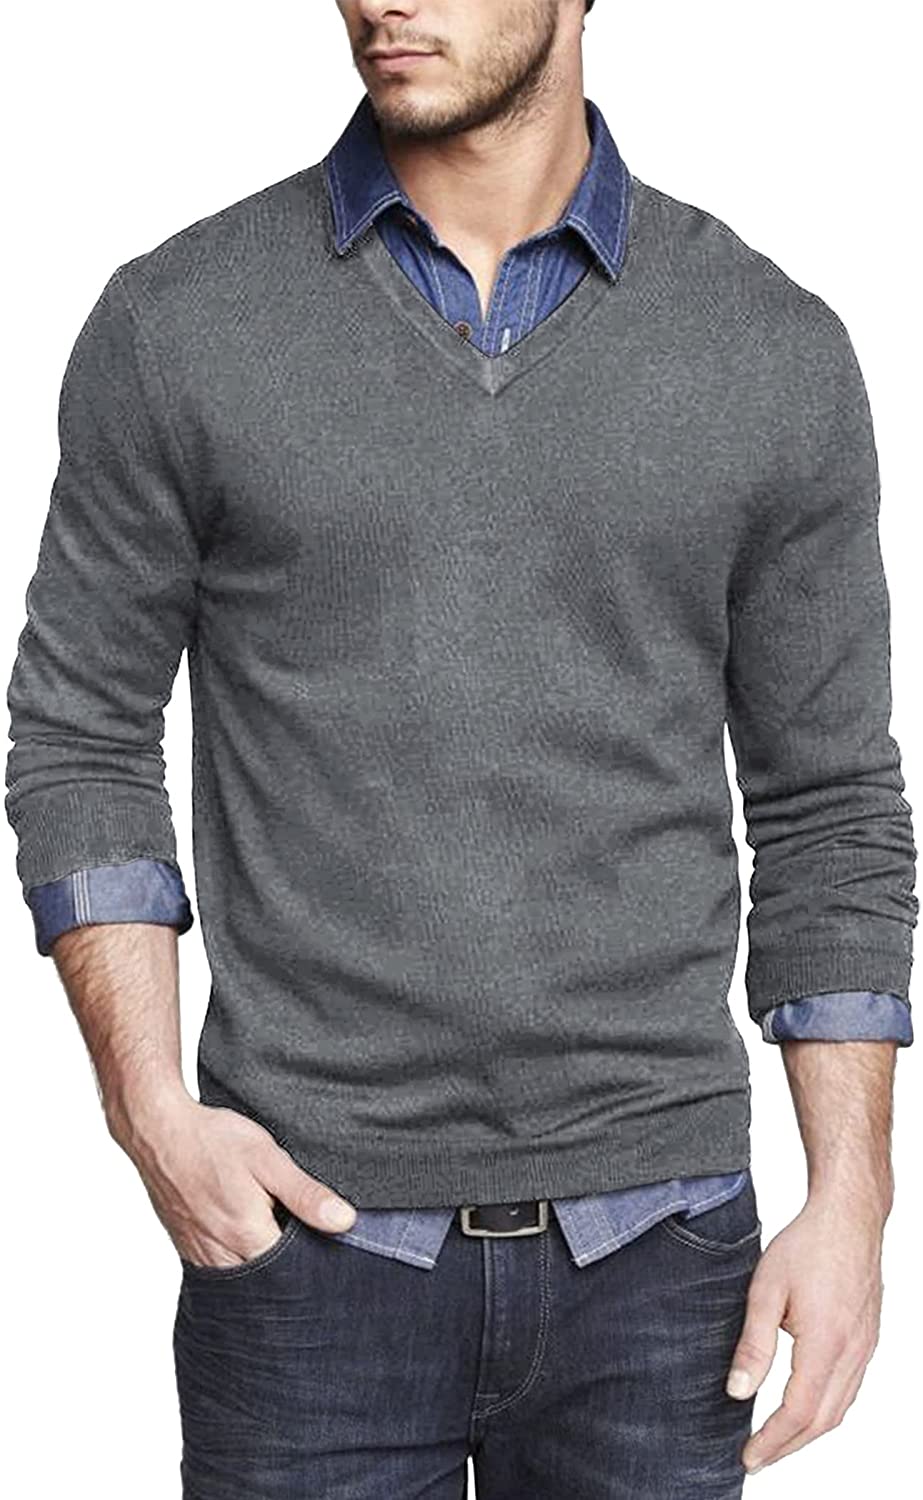 COOFANDY Men Casual V Neck Sweater Ribbed Knit Slim Fit Long Sleeve Pullover Top Grey